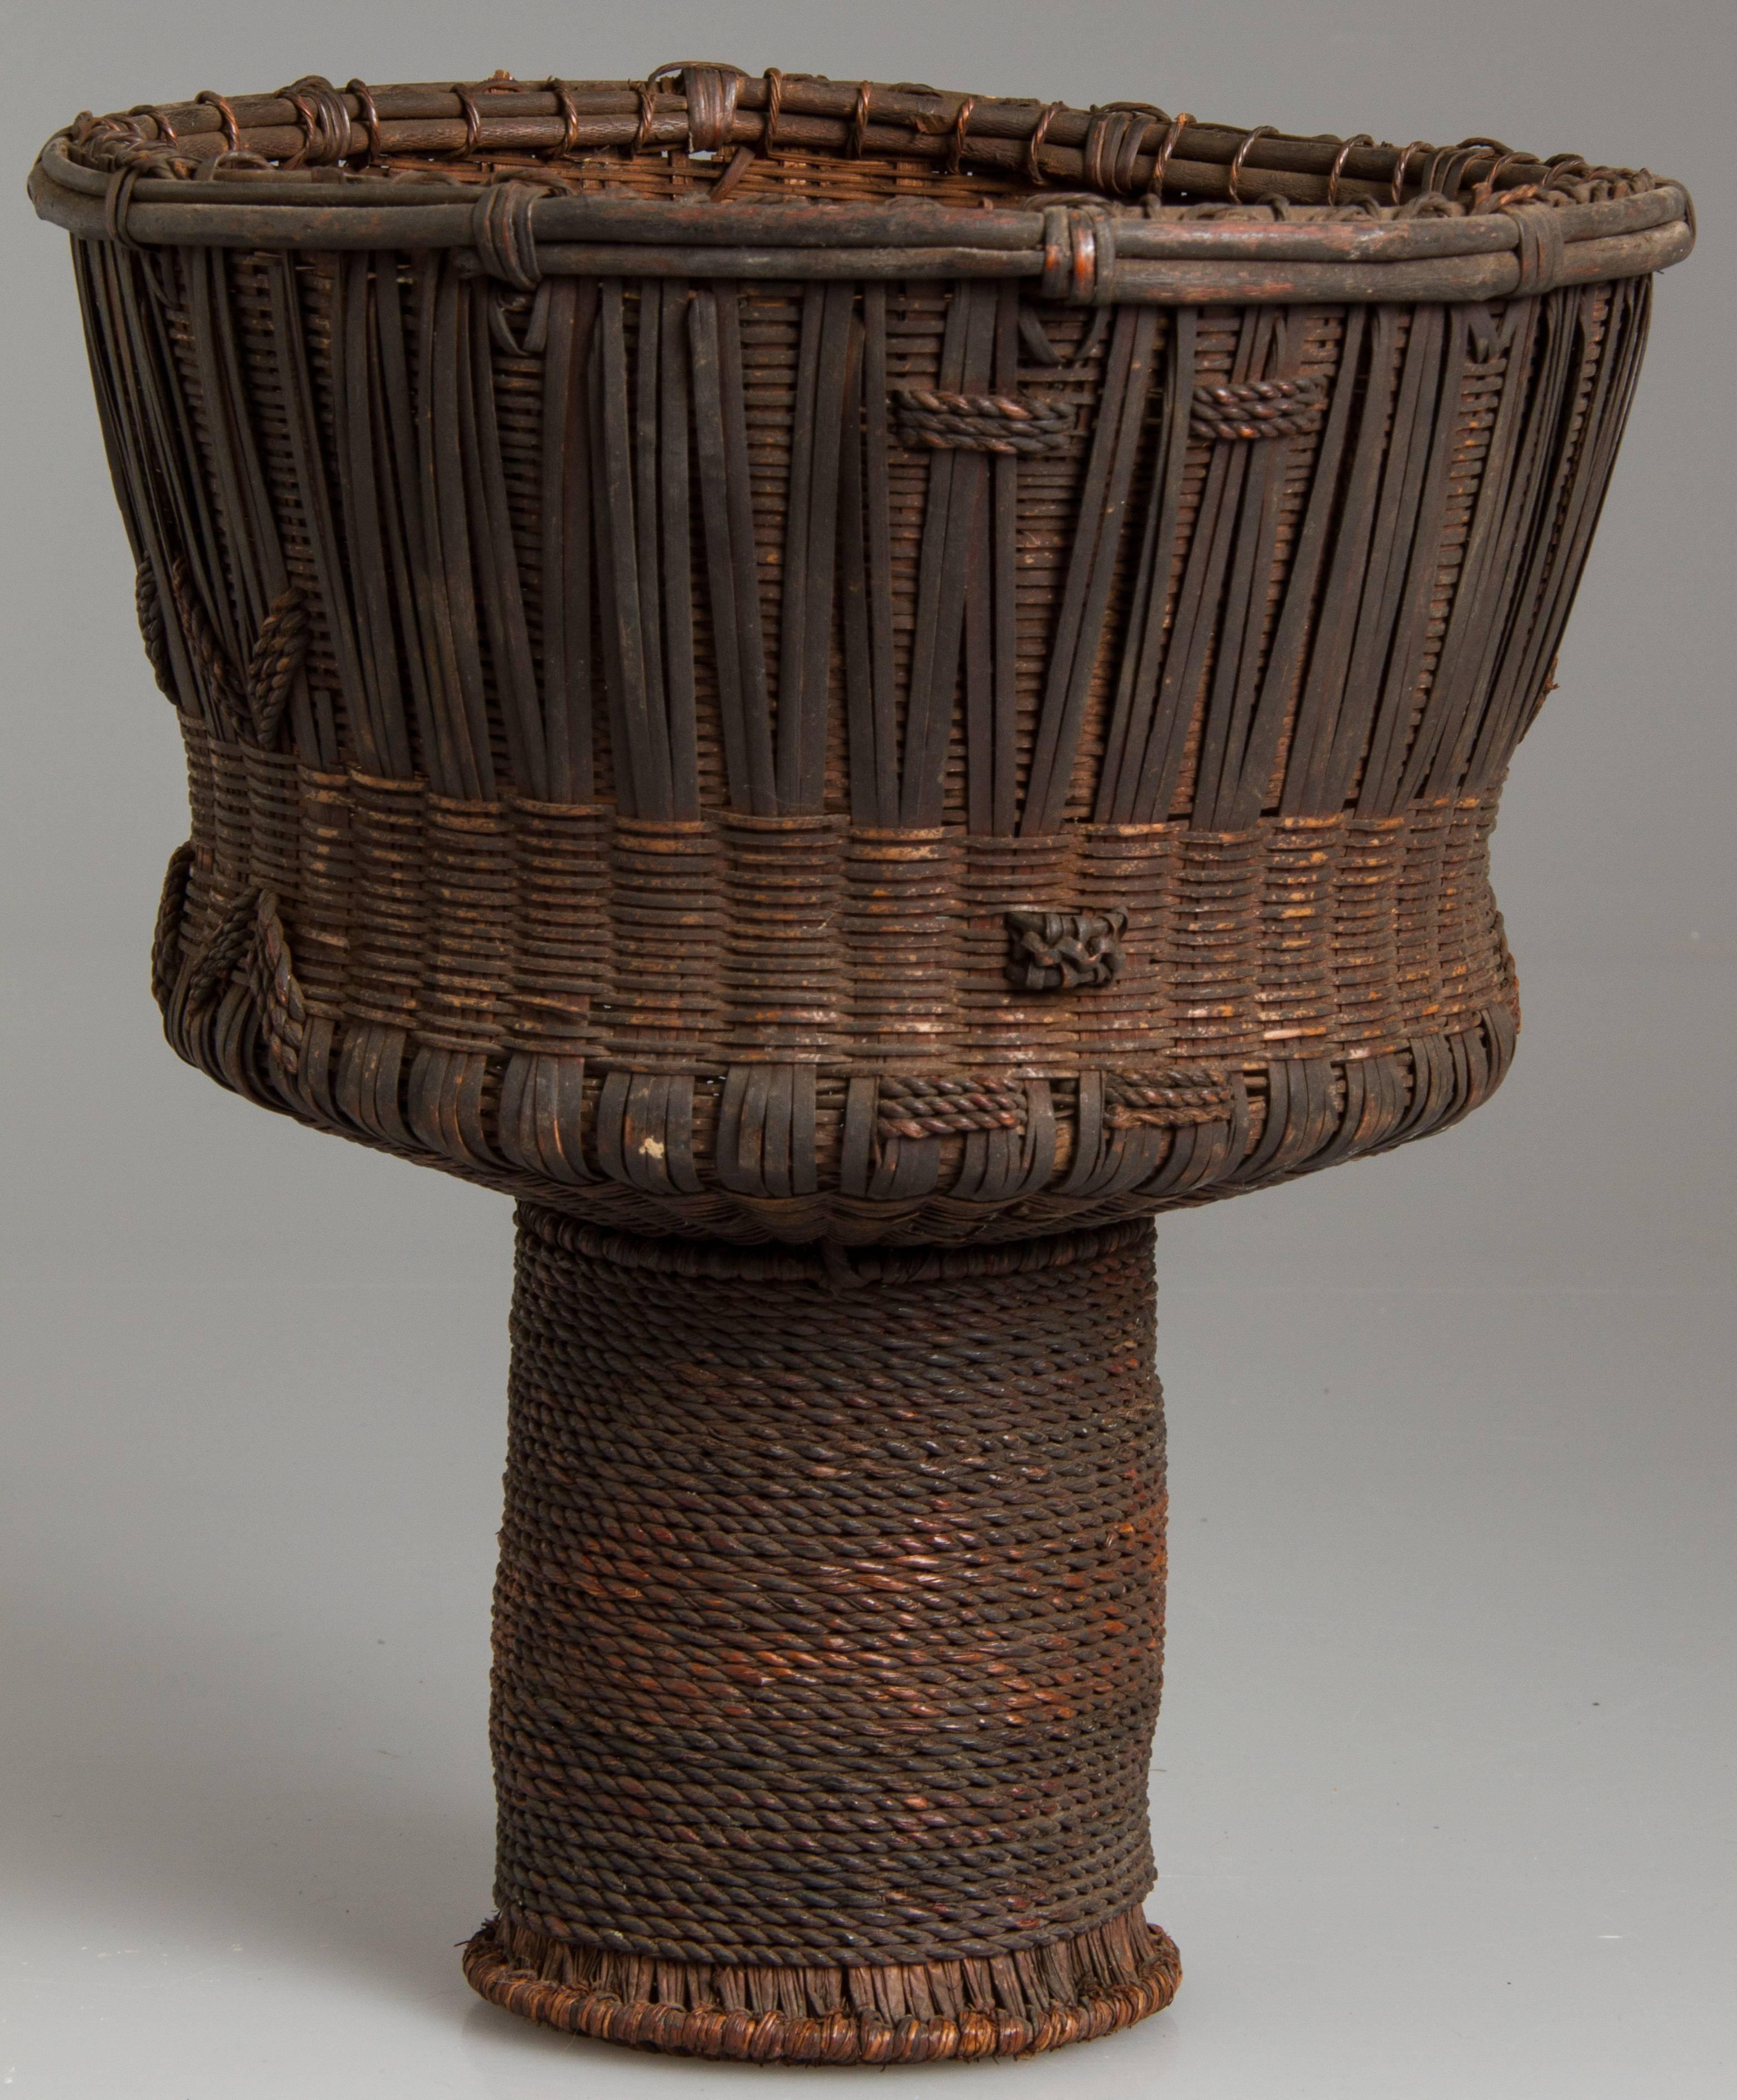 This is a great looking basket, very sculptural from the area around Bamenda, SW Cameroon